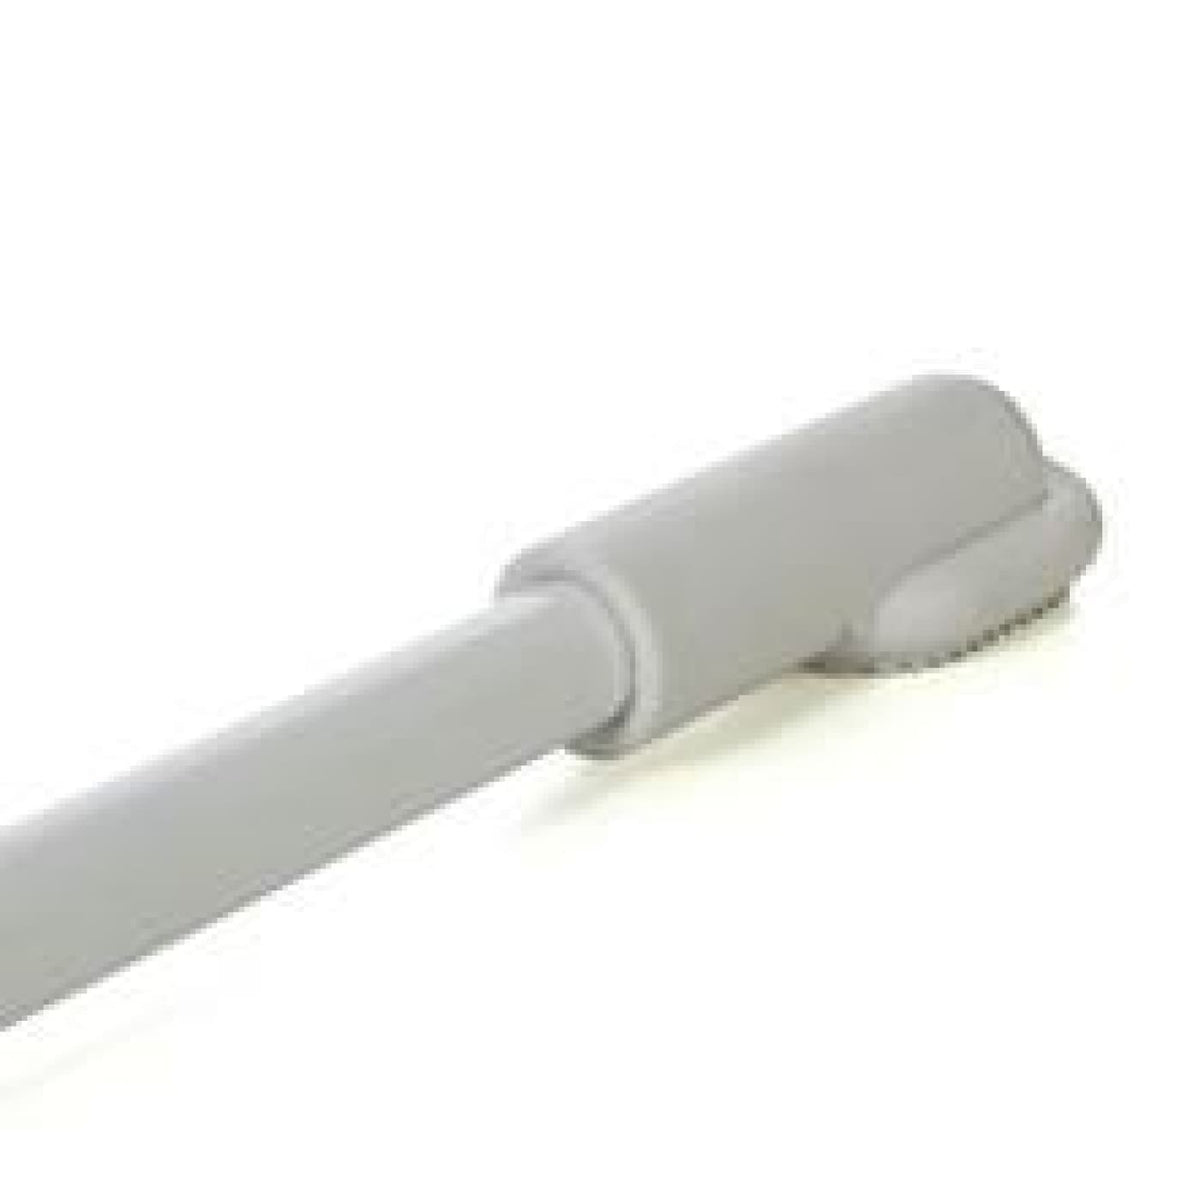 Veebee Bedguard Fixed - White - HEALTH &amp; HOME SAFETY - BED RAILS